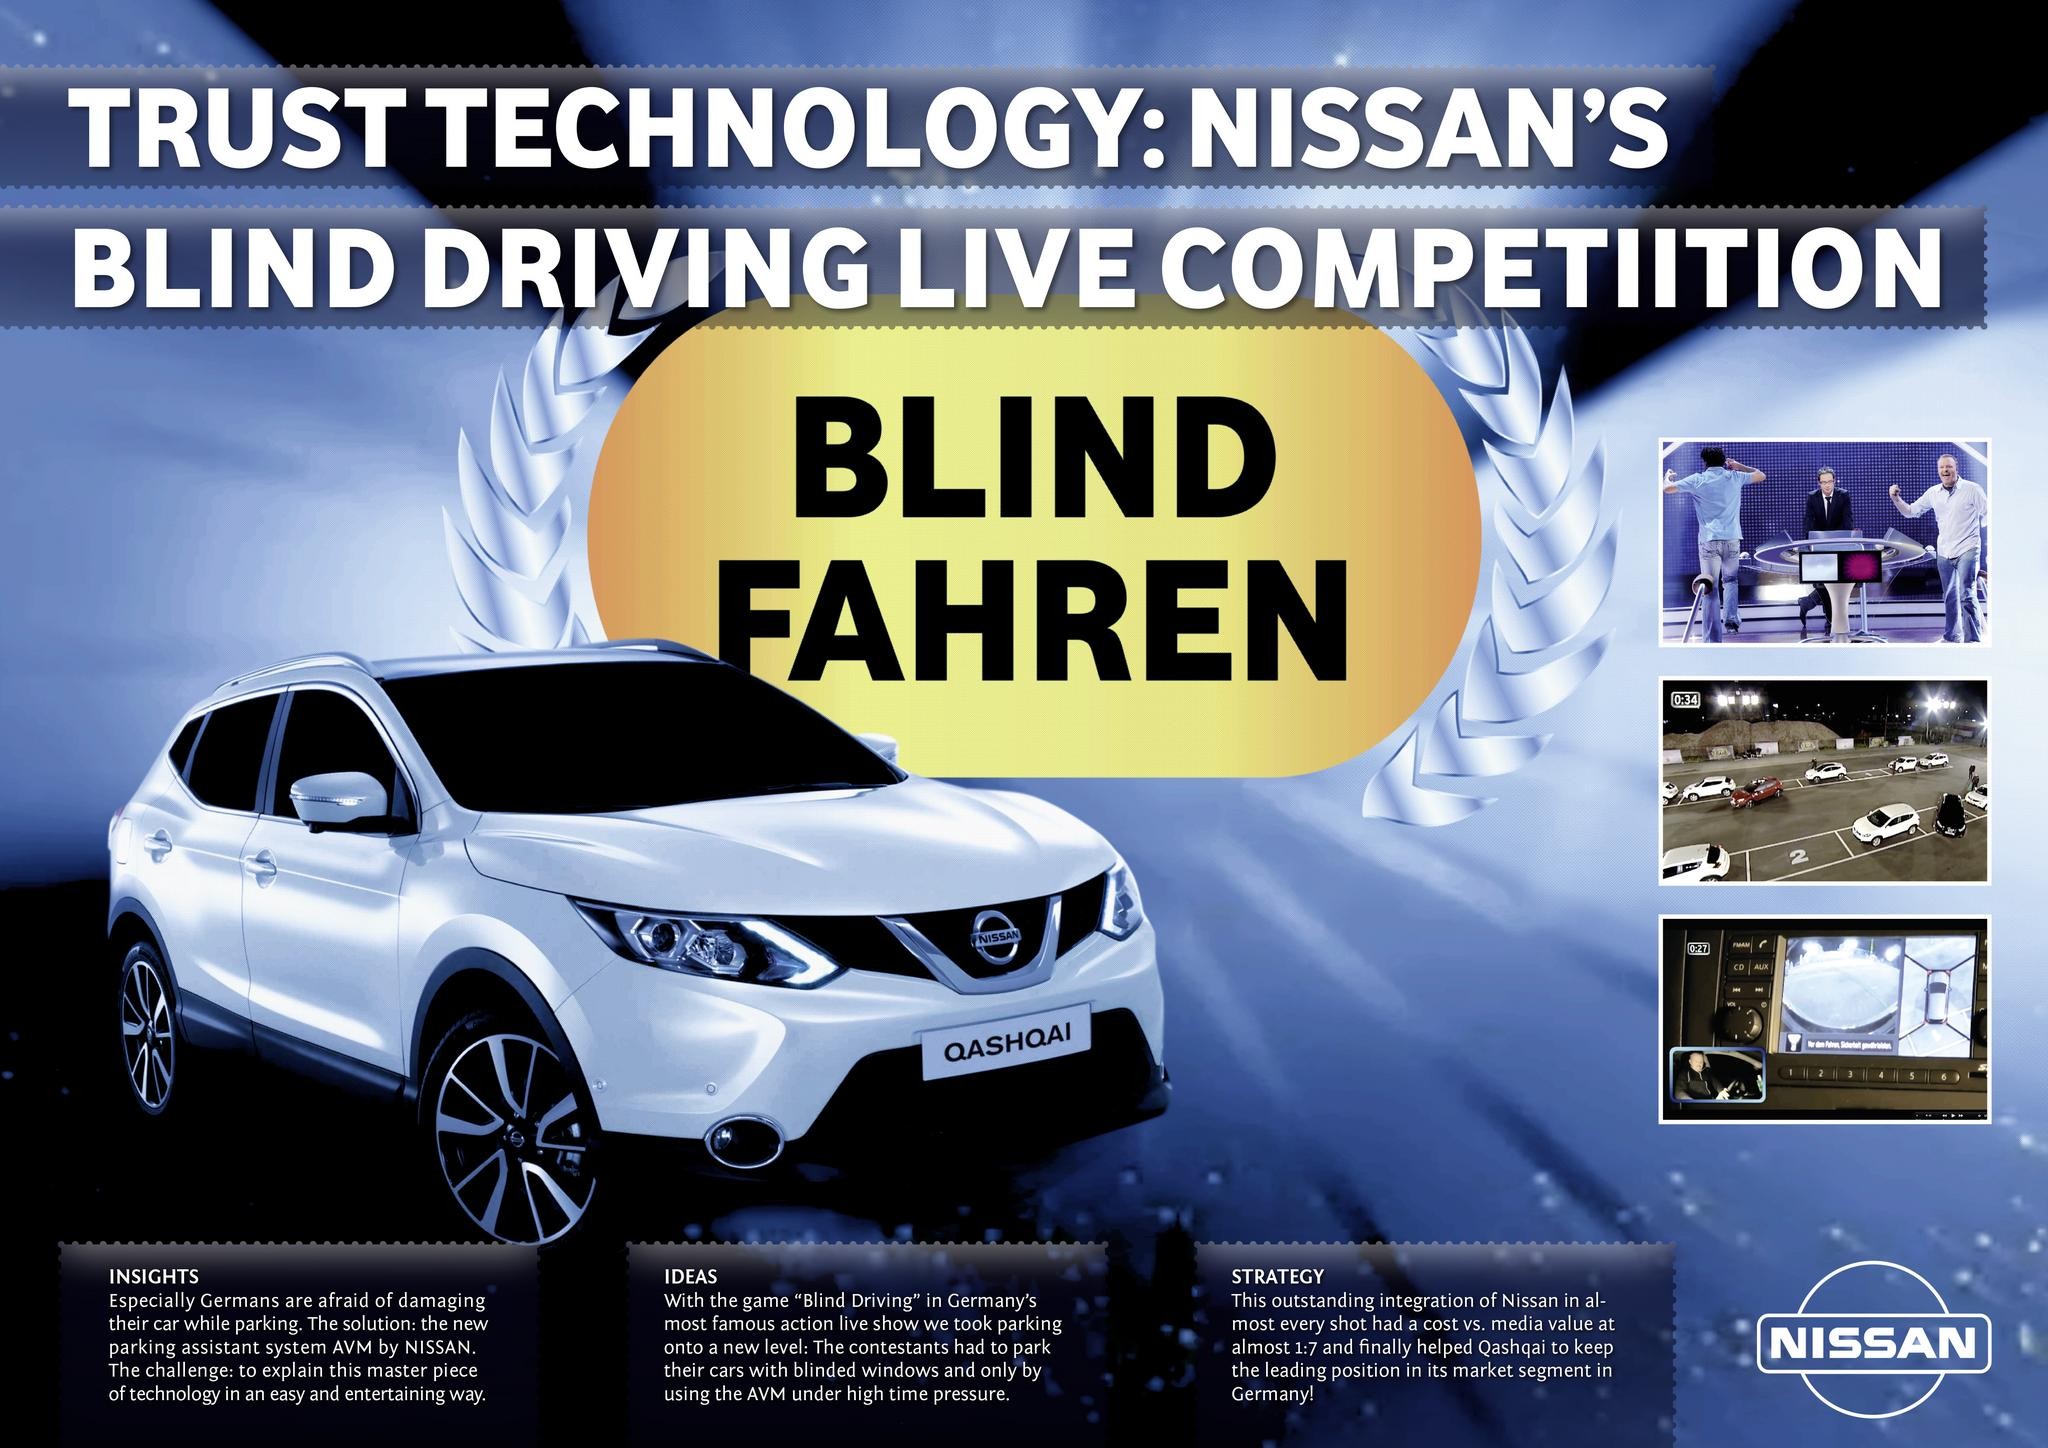 TRUST TECHNOLOGY: NISSAN'S BLIND DRIVING LIVE COMPETITION